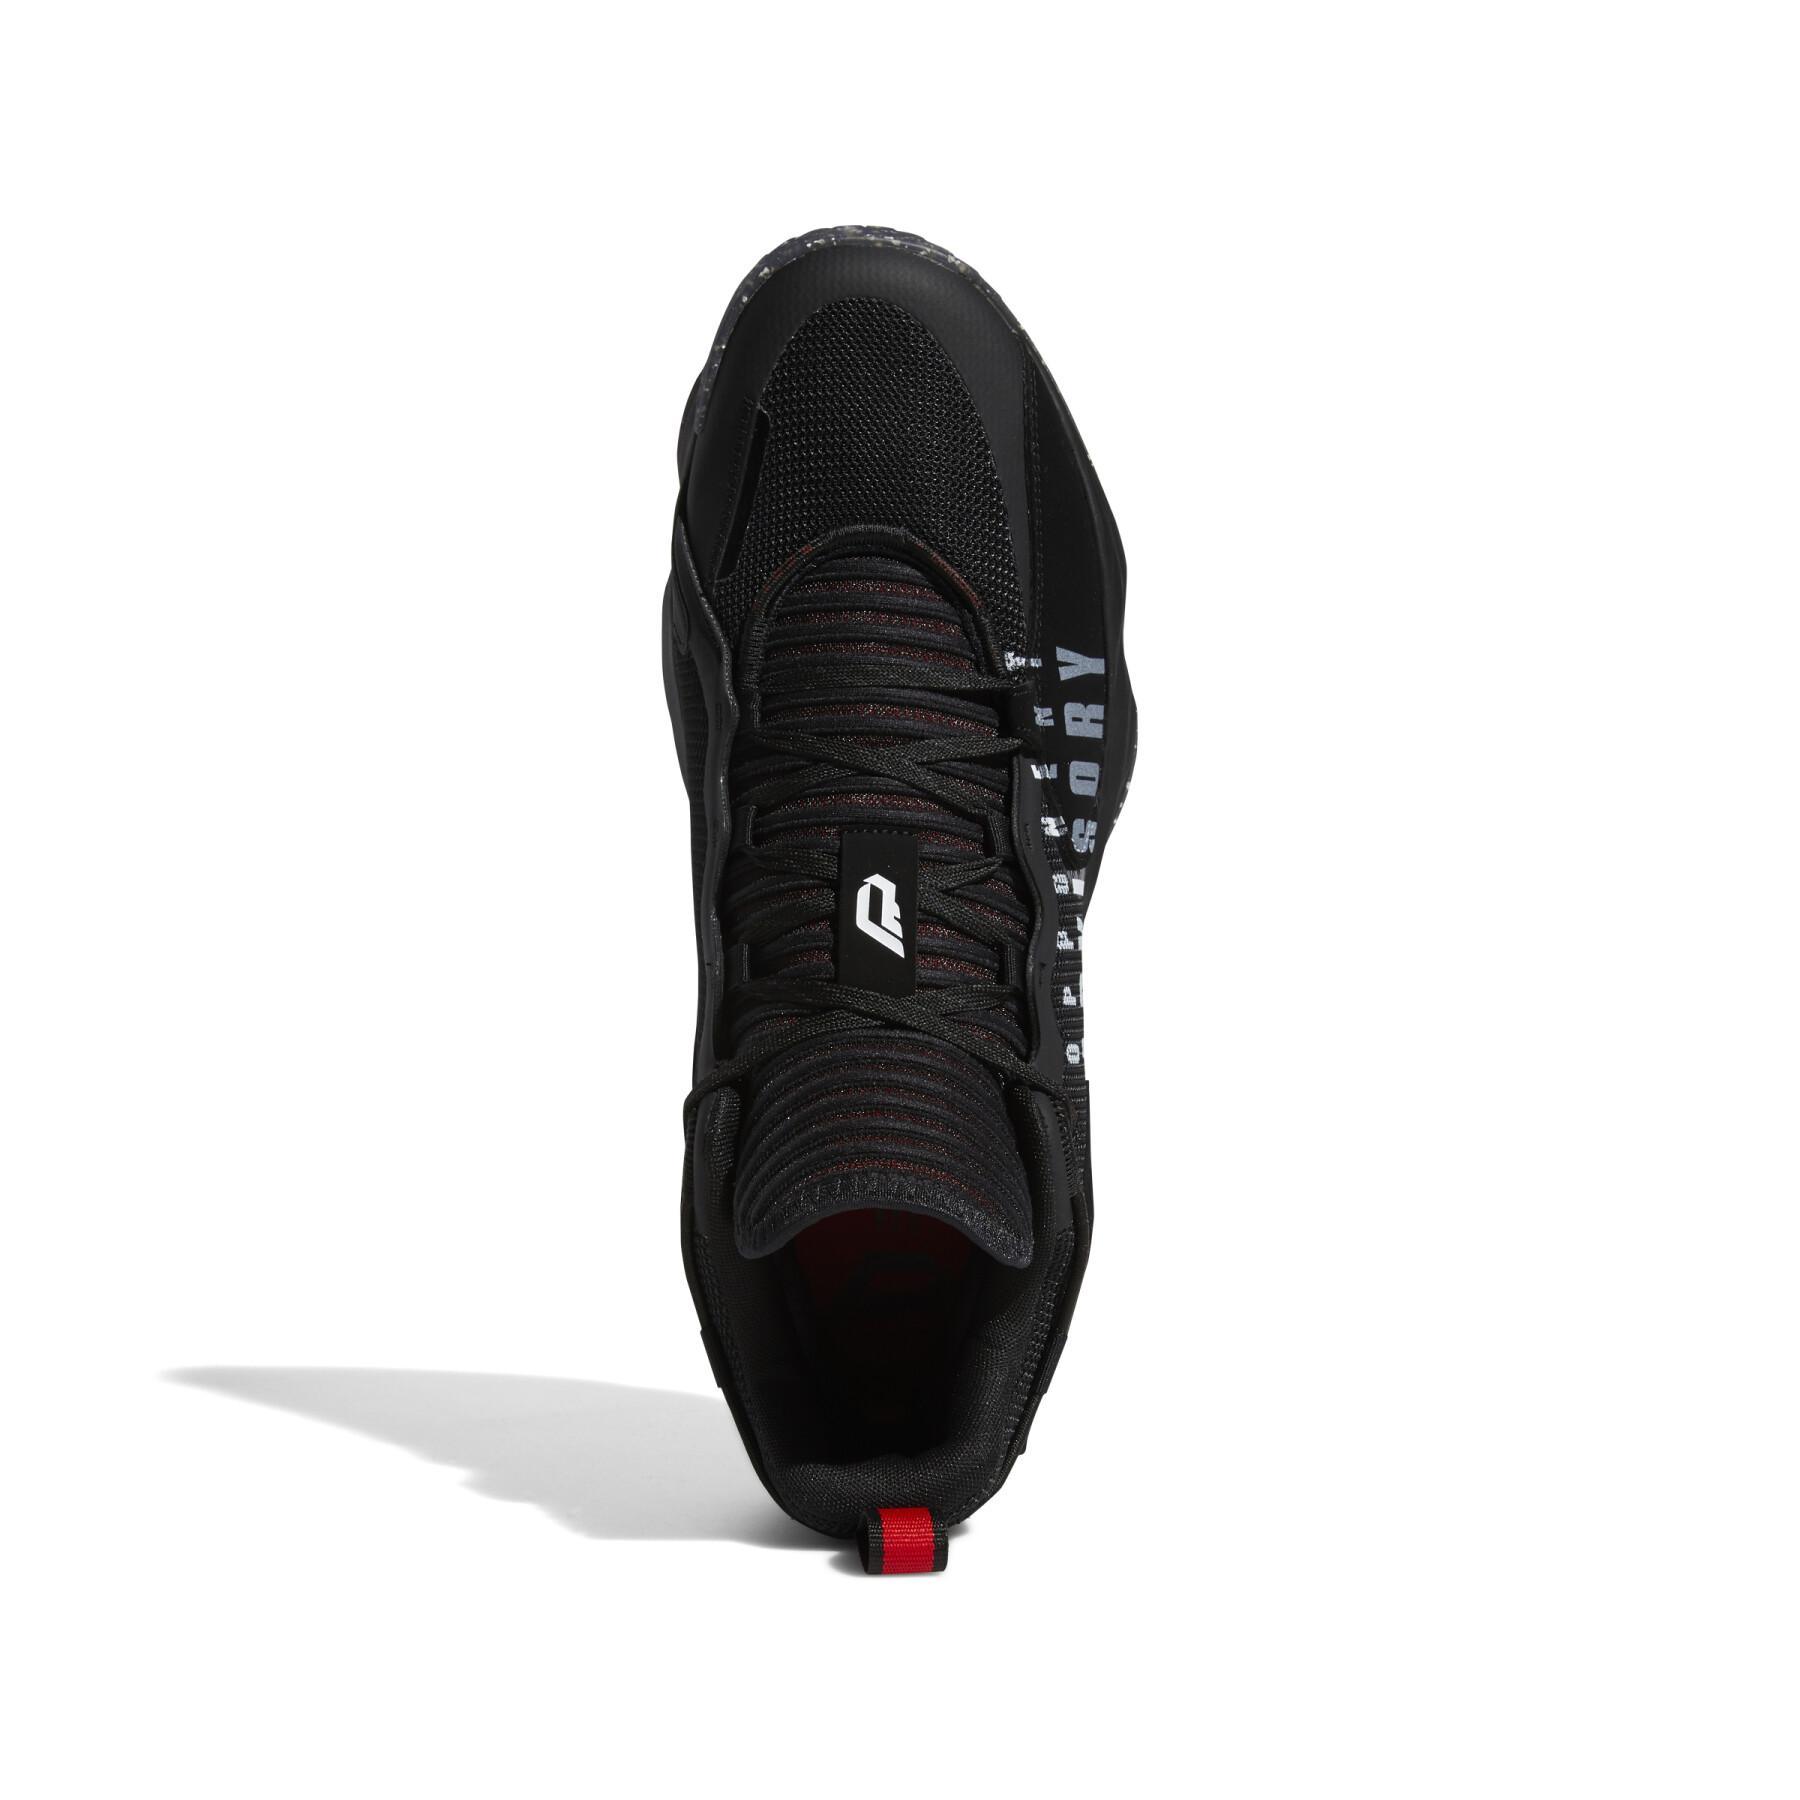 Indoor shoes adidas Dame 7 EXTPLY: Opponent Advisory